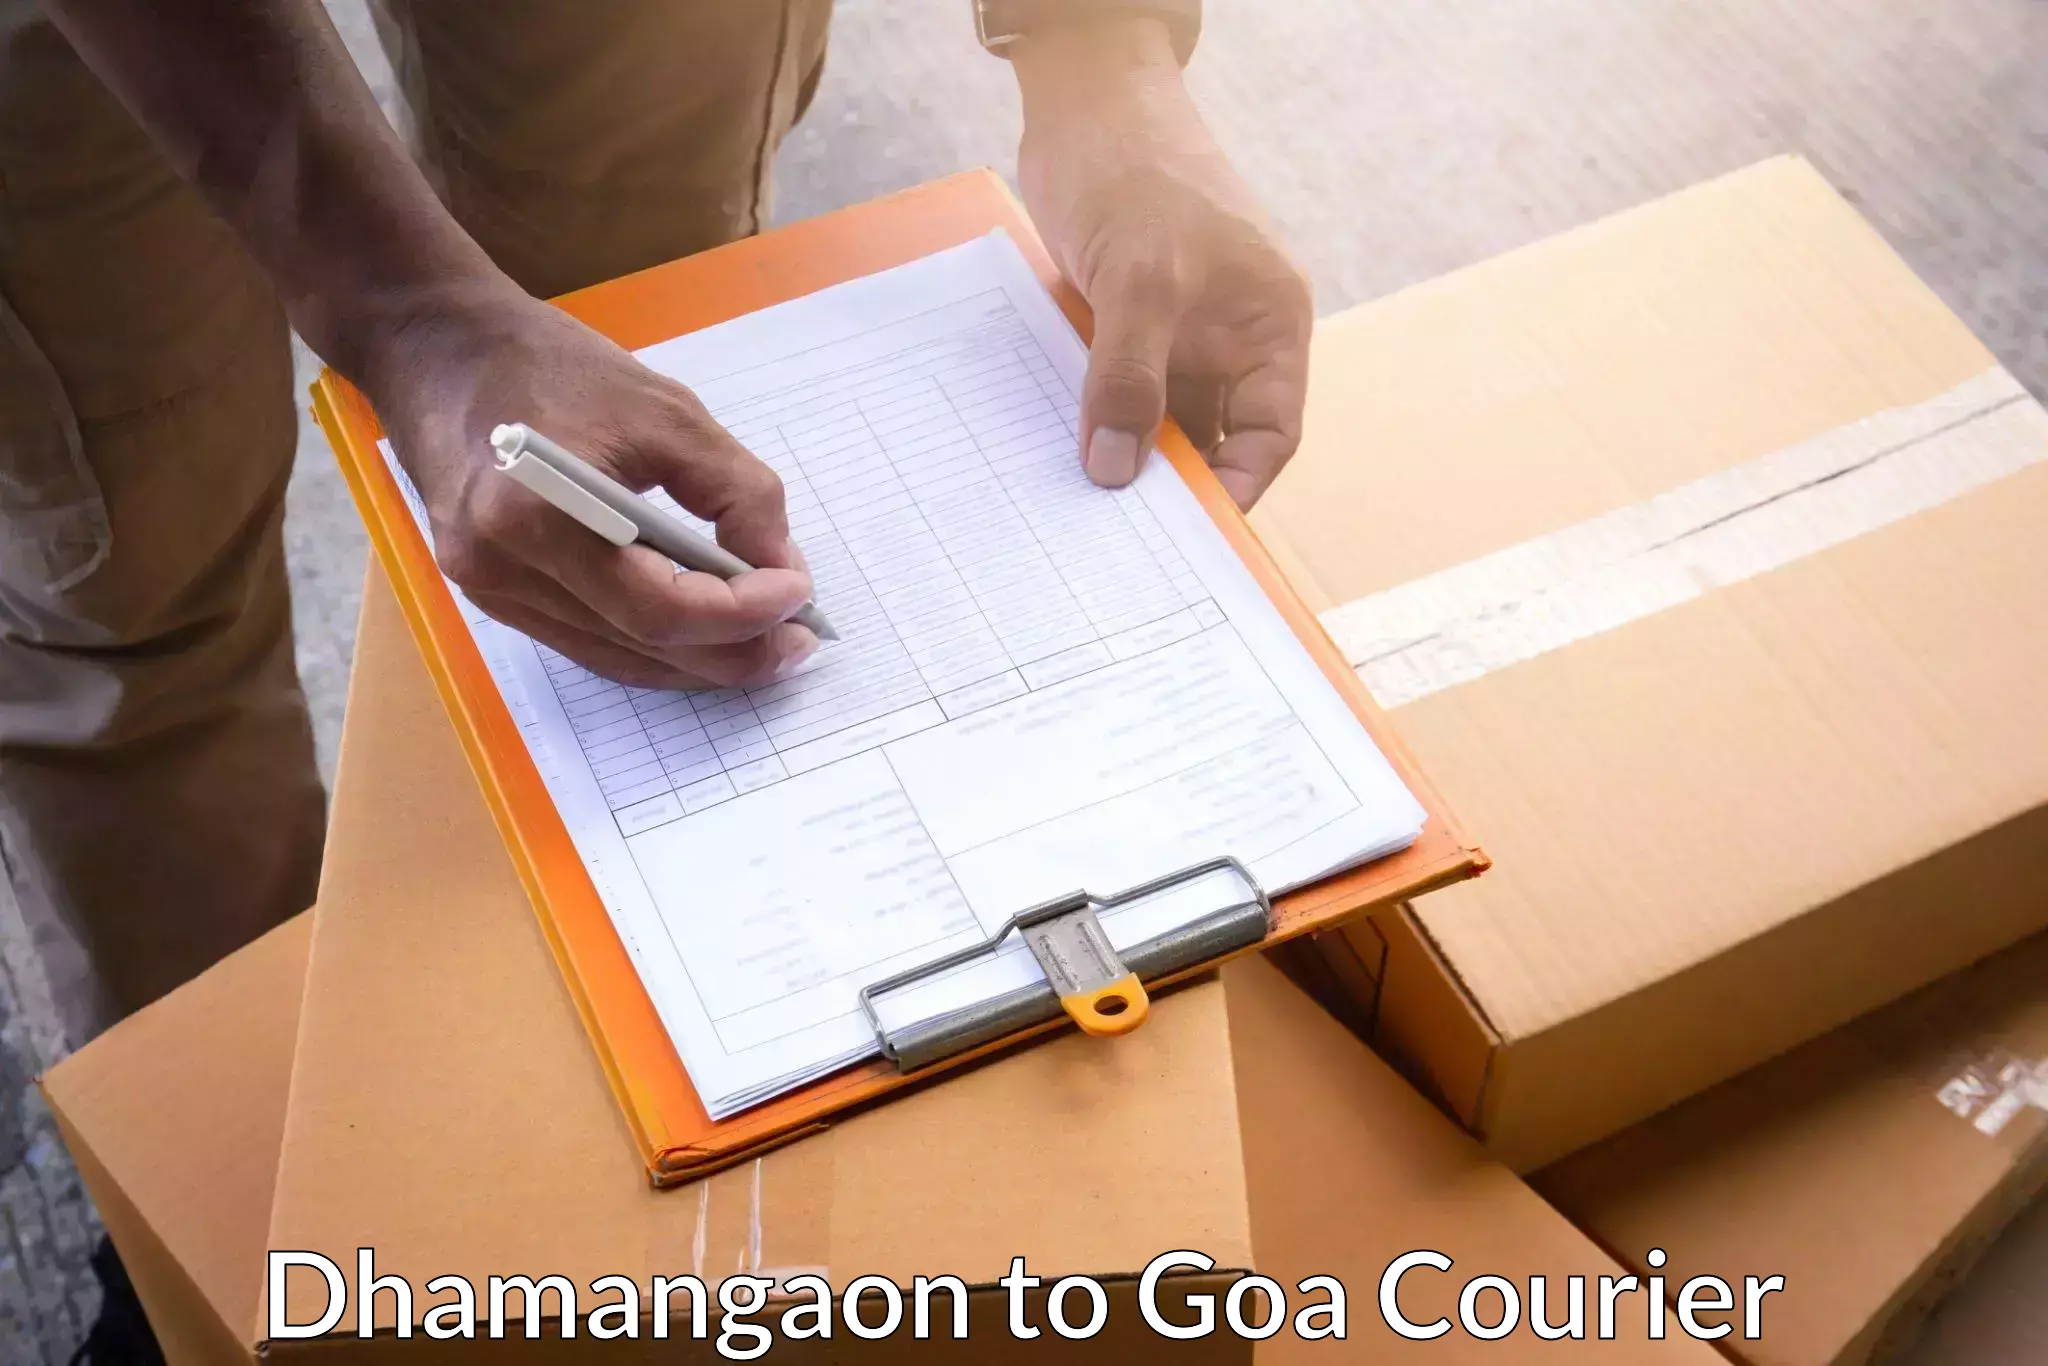 Courier service efficiency in Dhamangaon to Mormugao Port